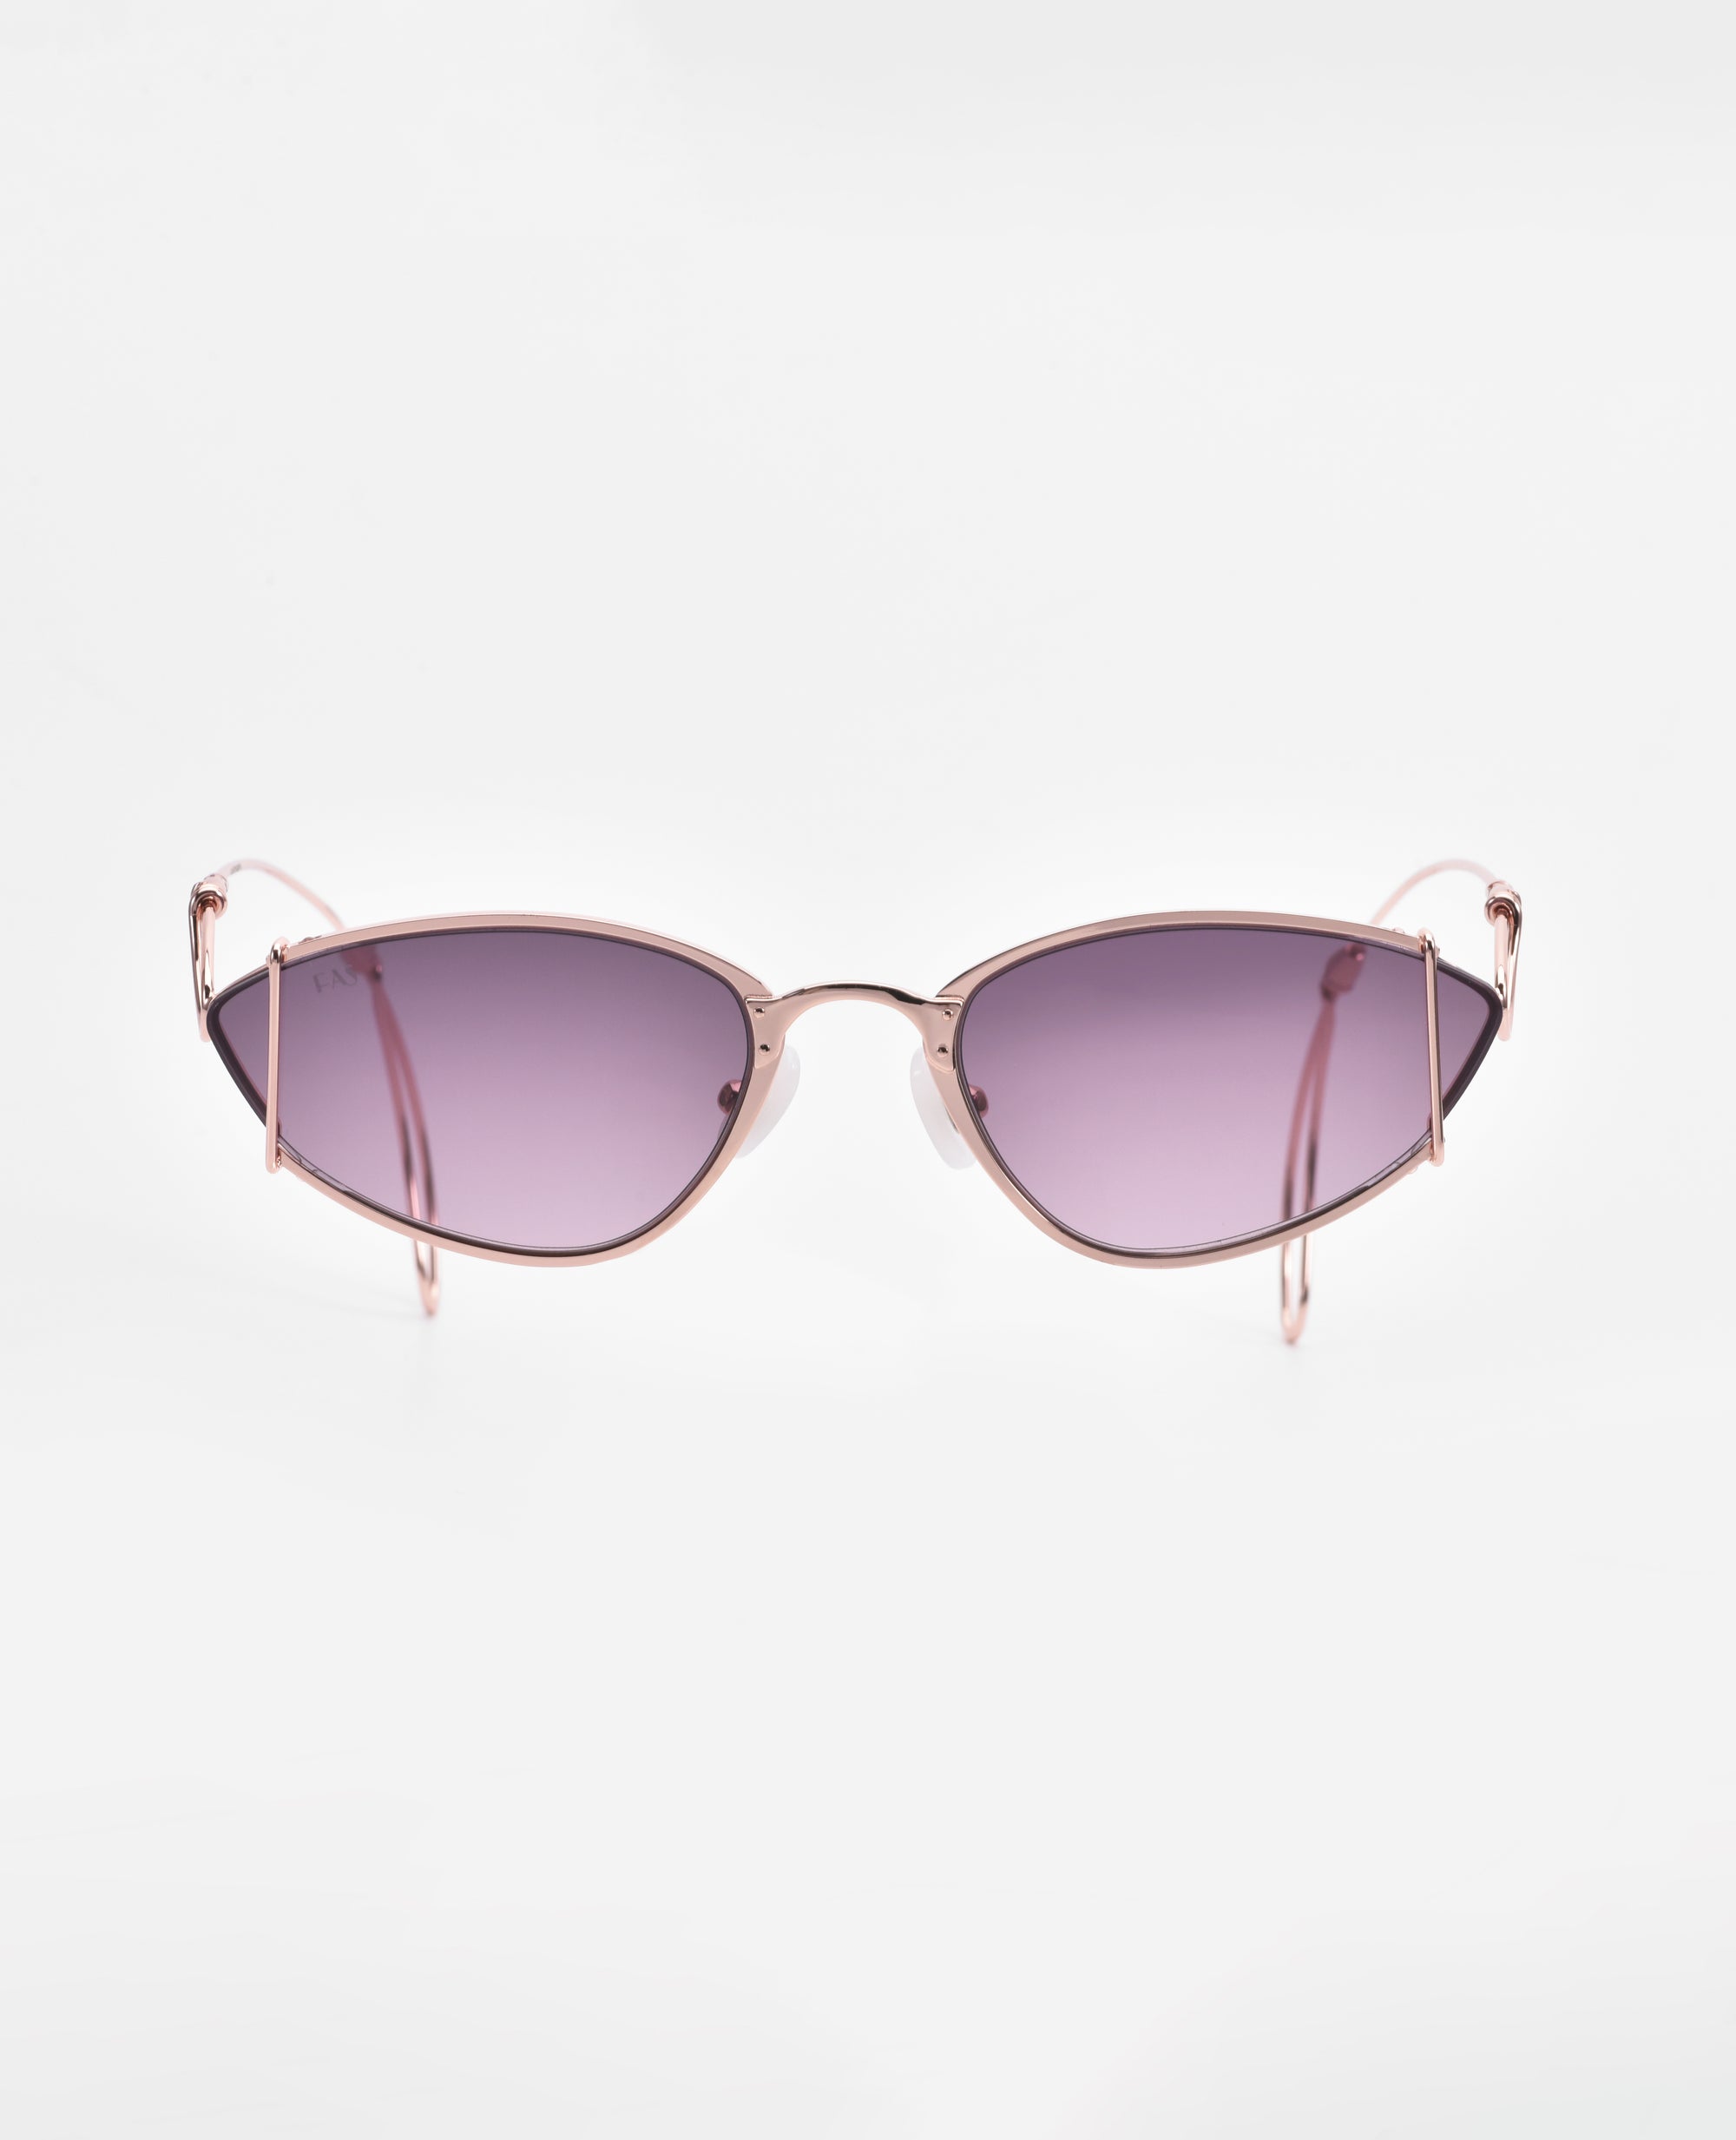 A pair of stylish, cat-eye sunglasses with rose gold-plated stainless steel frames and dark purple lenses. The Ornate by For Art's Sake® are centered against a white background, showcasing their sleek and modern design while offering 100% UVA & UVB protection and an anti-reflective coating.